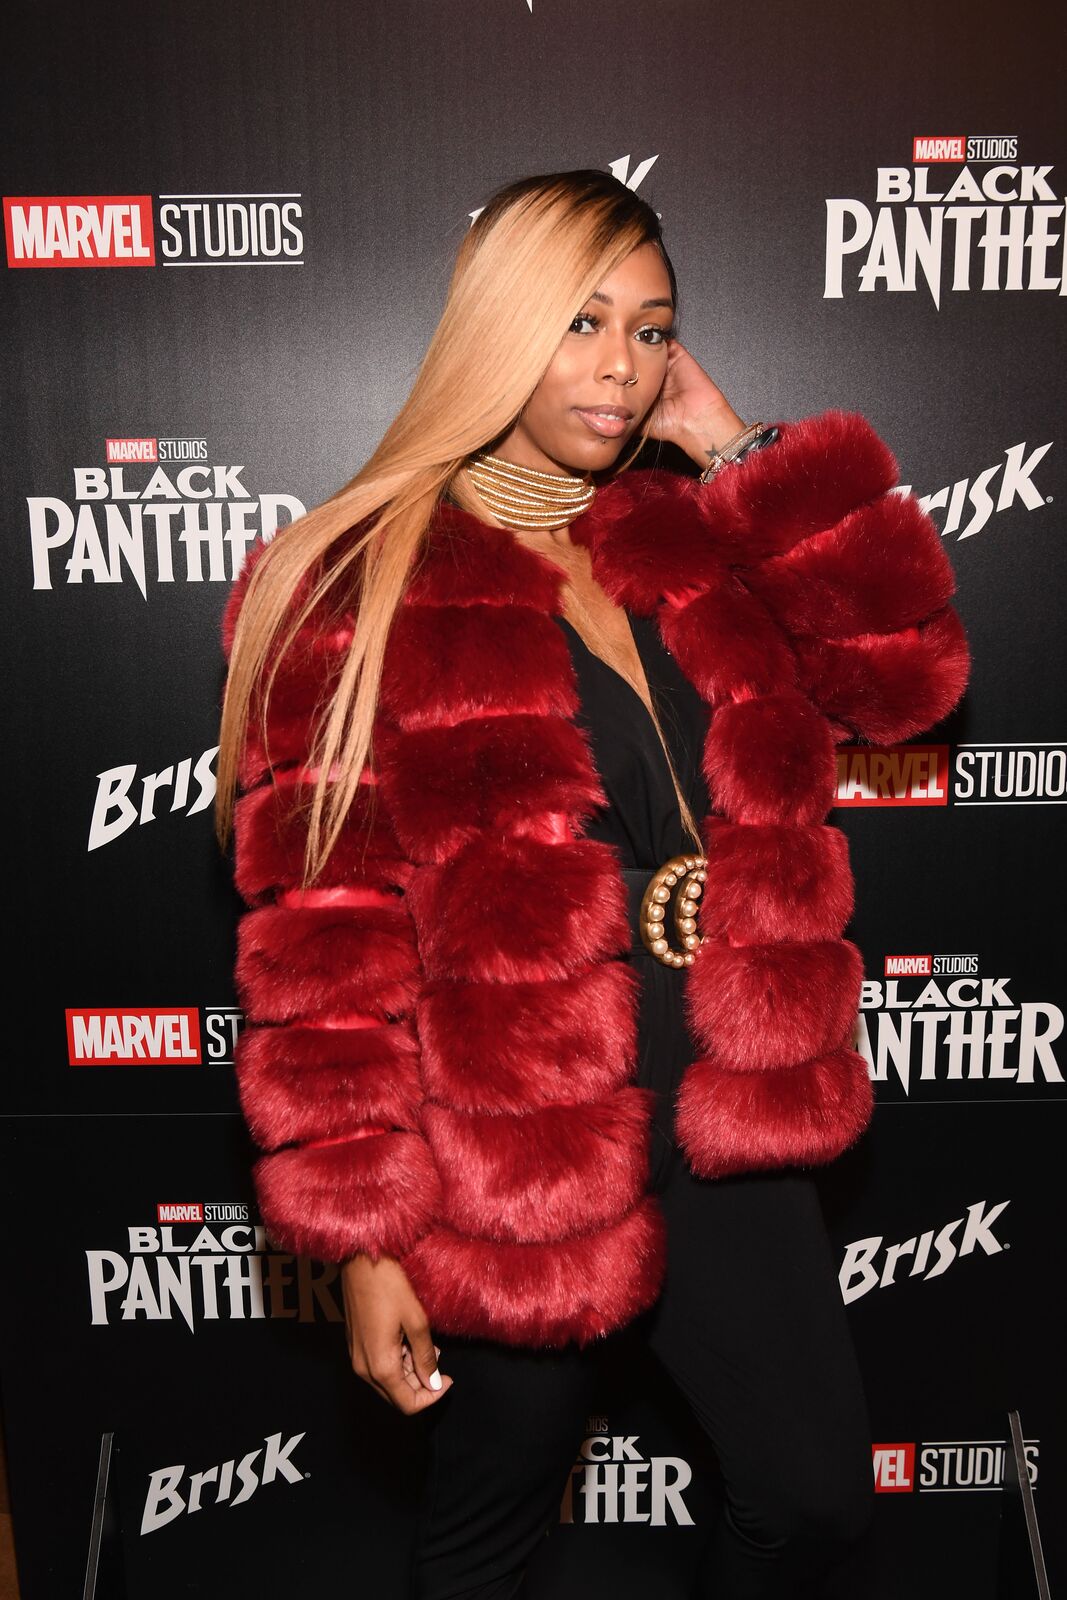 TV personality Adiz 'Bambi' Benson attends "Black Panther" Advanced Screening & Panel Discussion presented by Brisk at SCADshow on February 14, 2018 | Photo: Getty Images